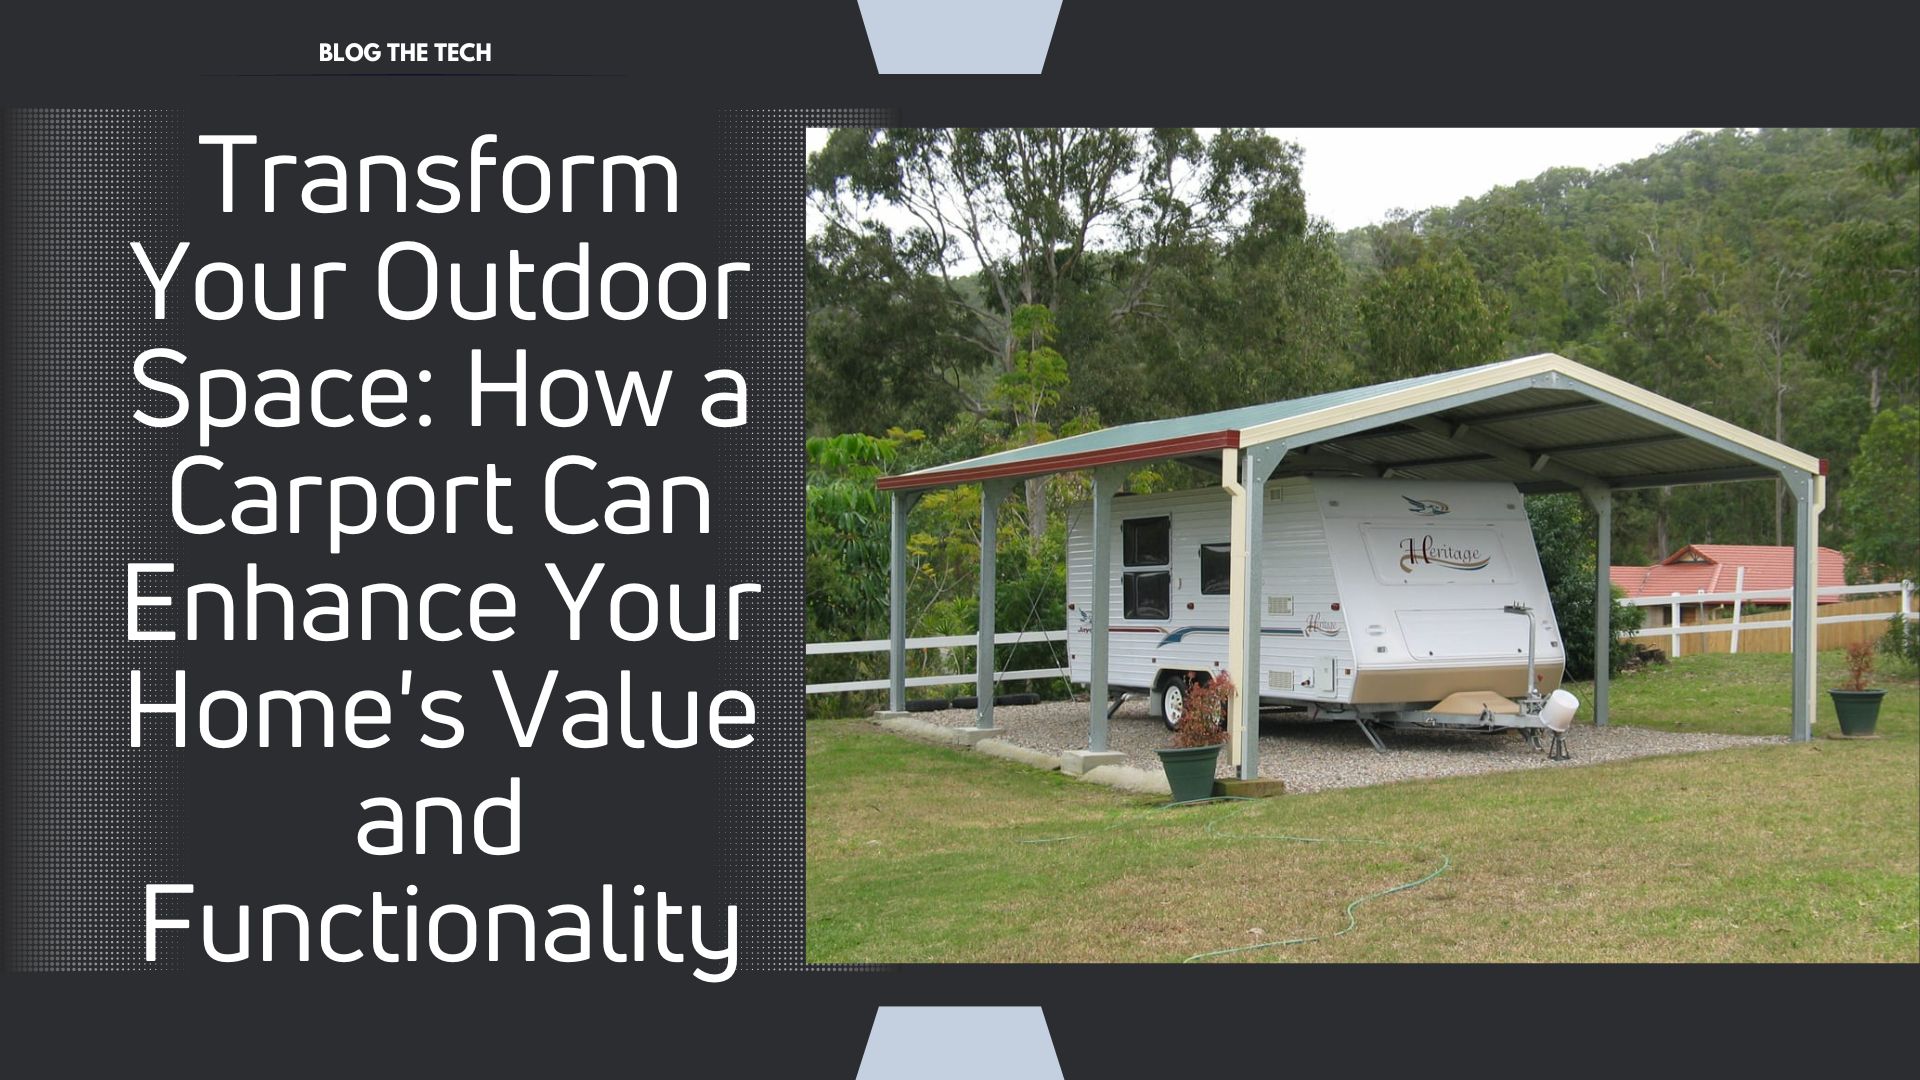 Enhance Home Value and Functionality with a Carport: Transform Your Outdoor Space